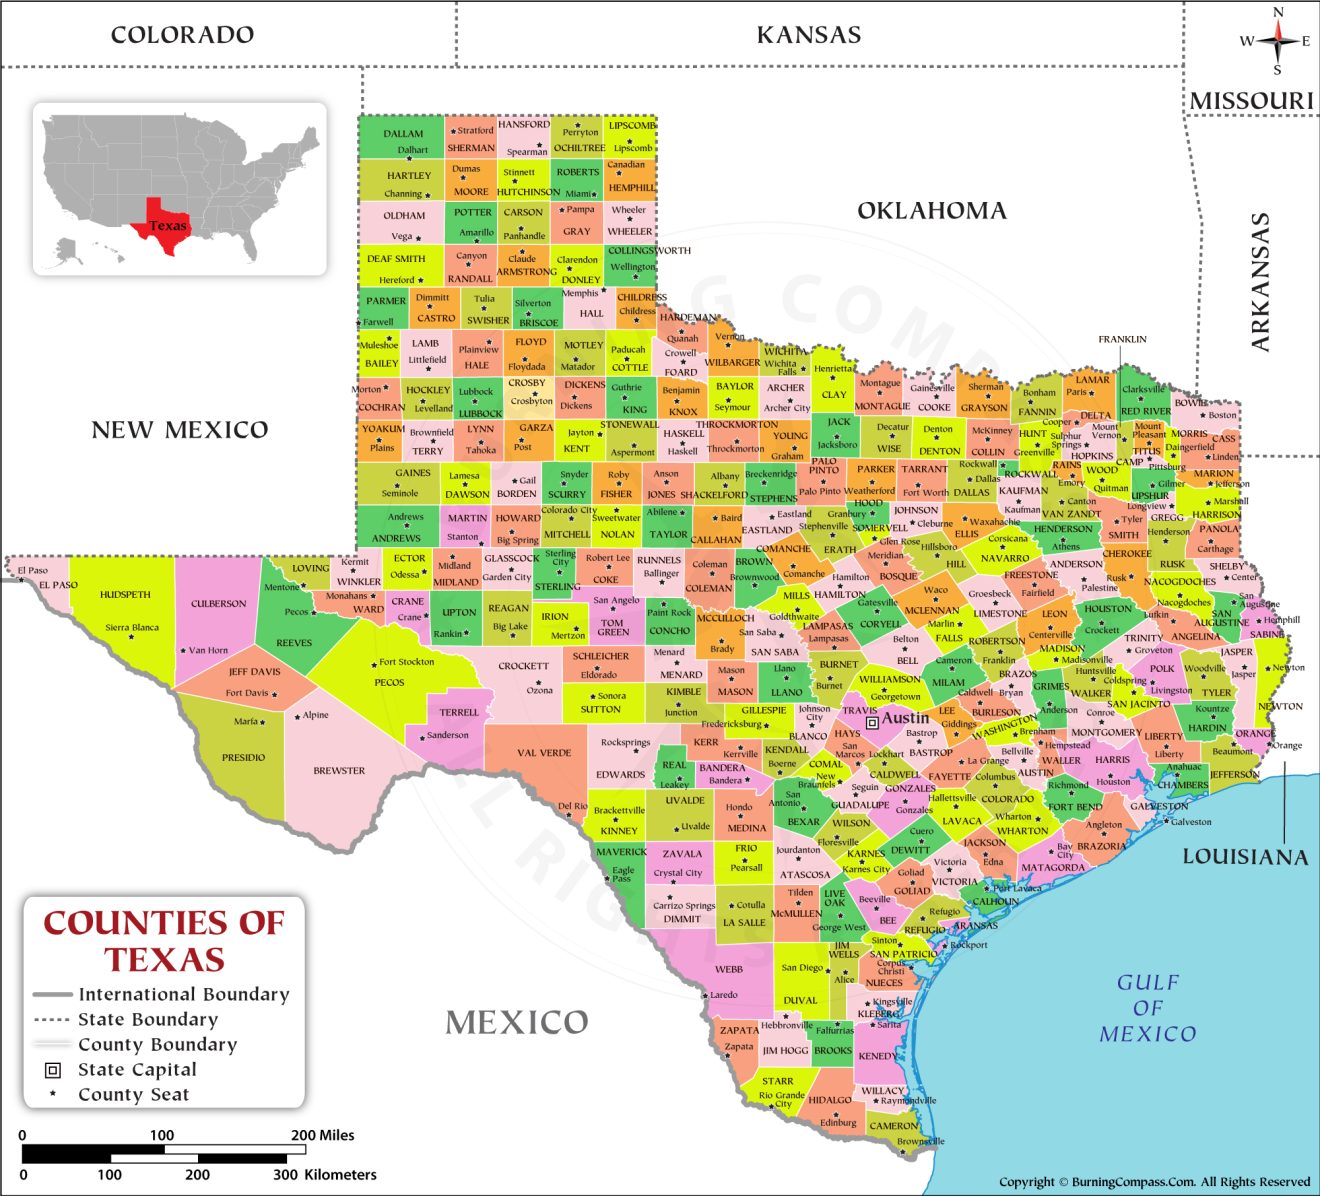 Buy Texas County Map Online, Purchase Texas County Map